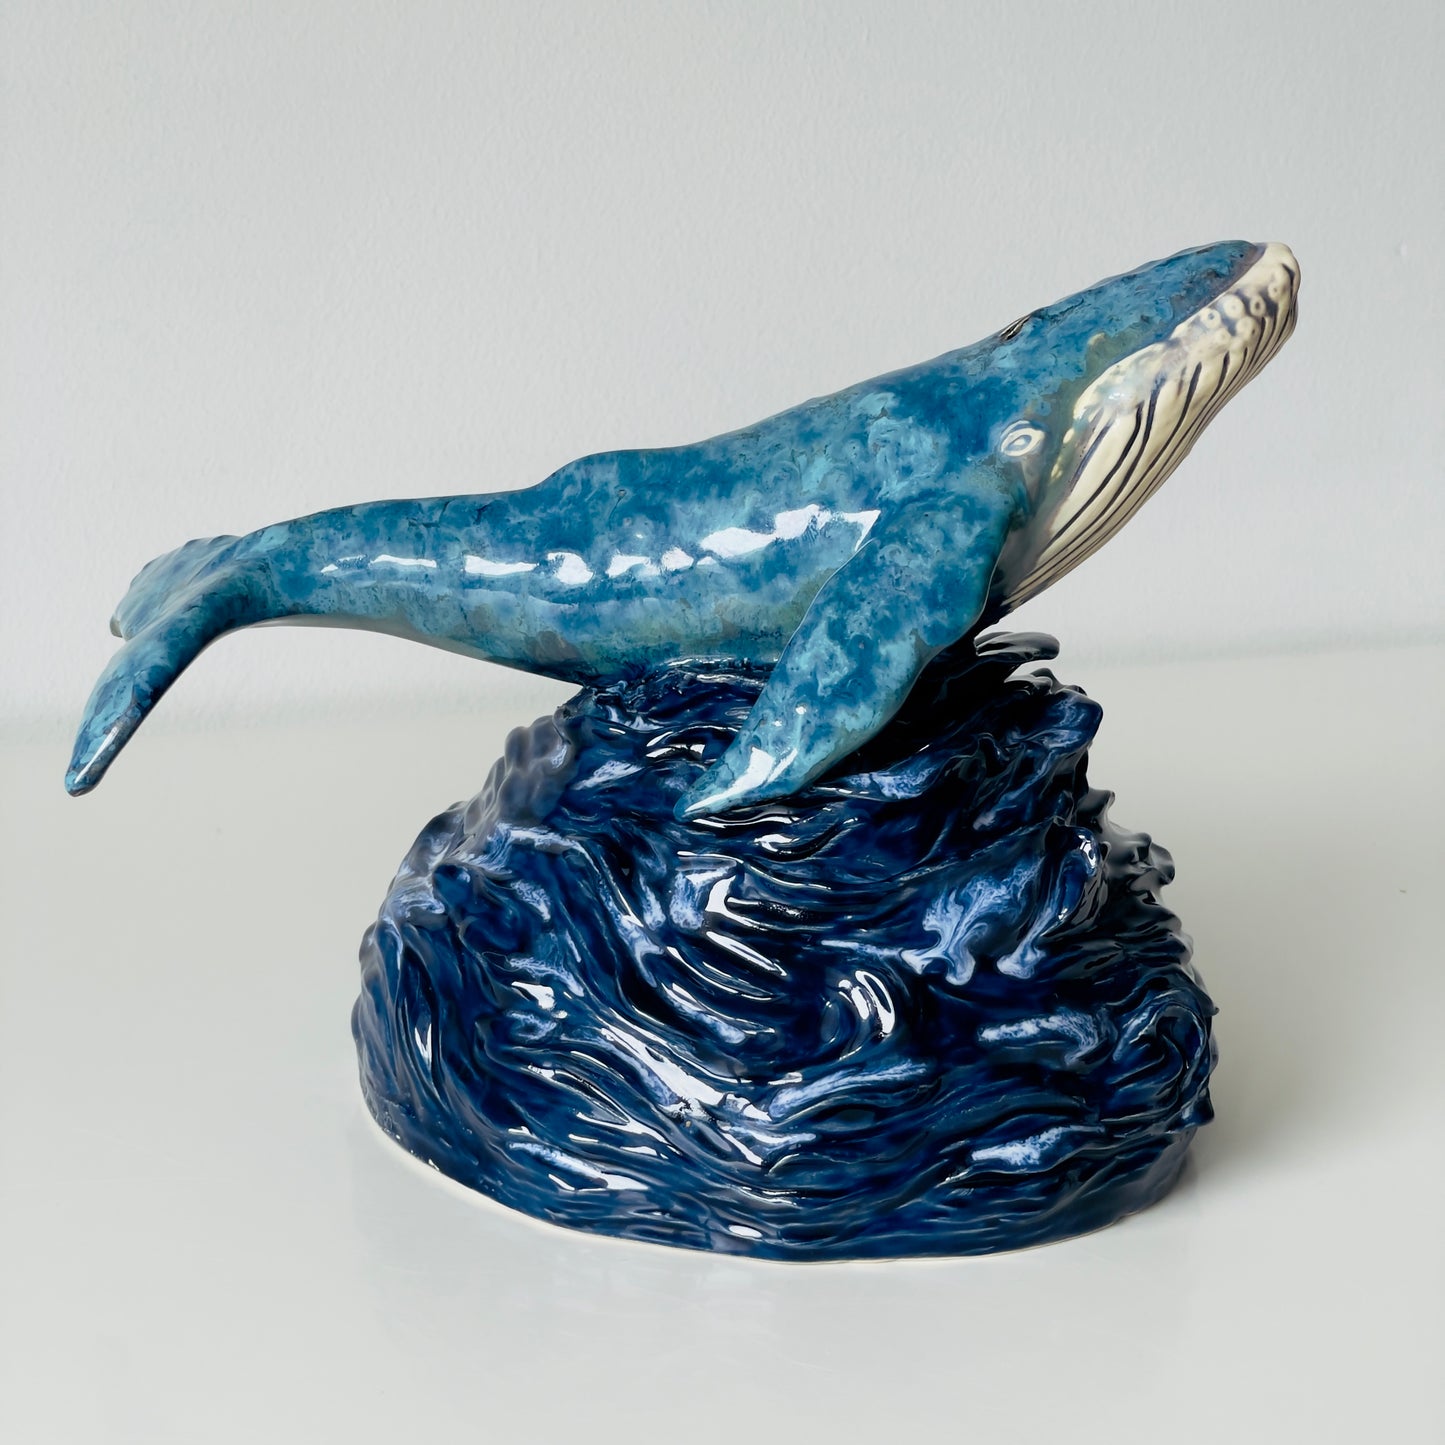 Humpback Whale on a stand